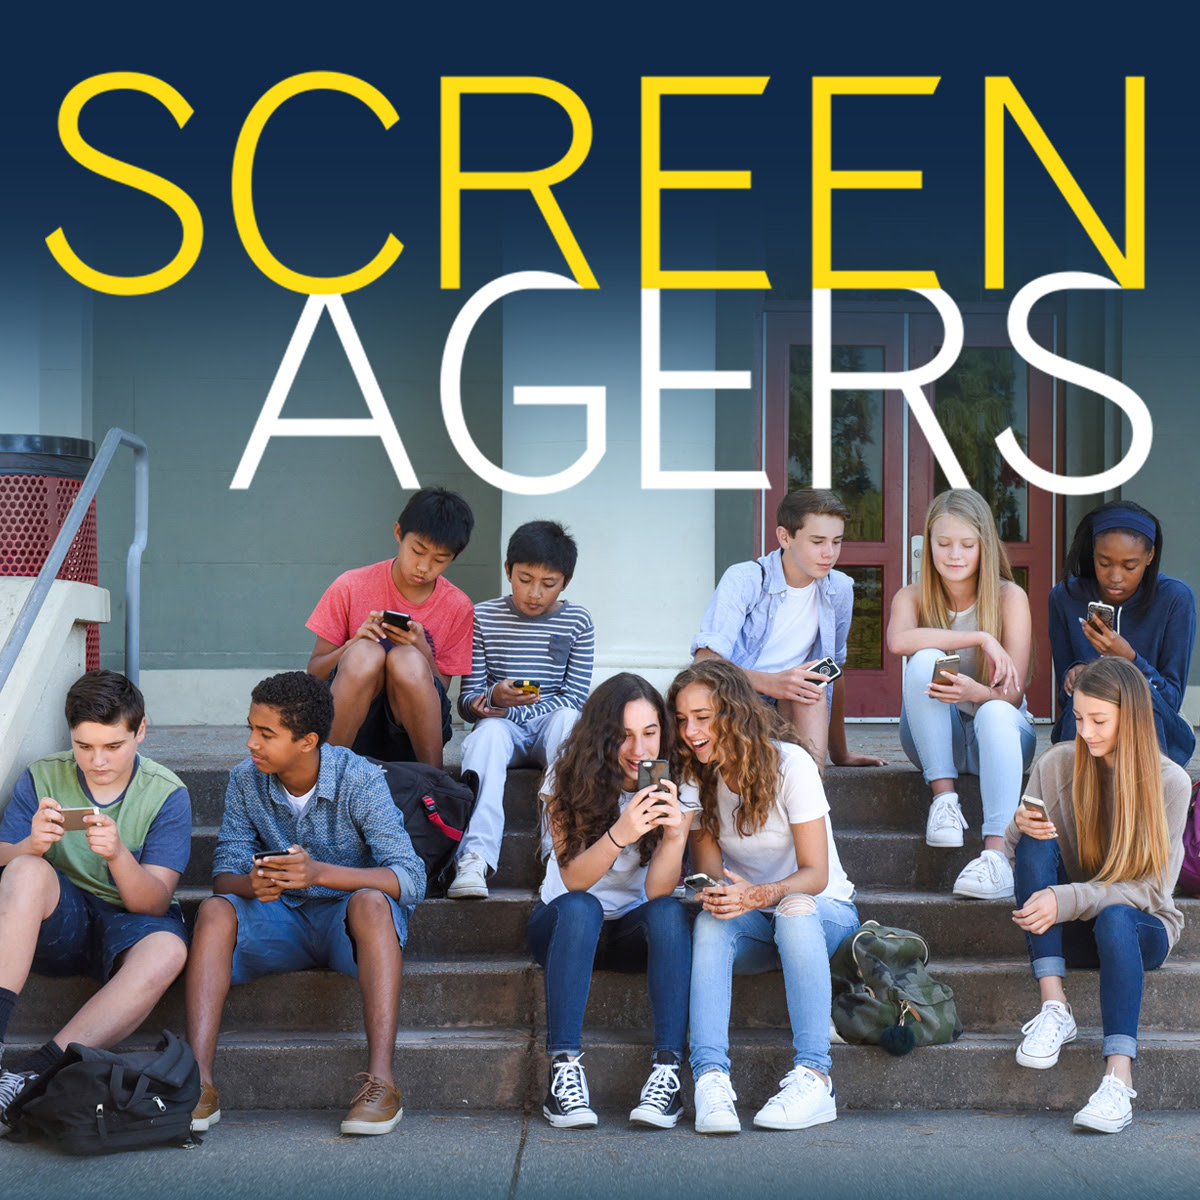 Screenagers Film Presented By Colonnade Group - Thrivent